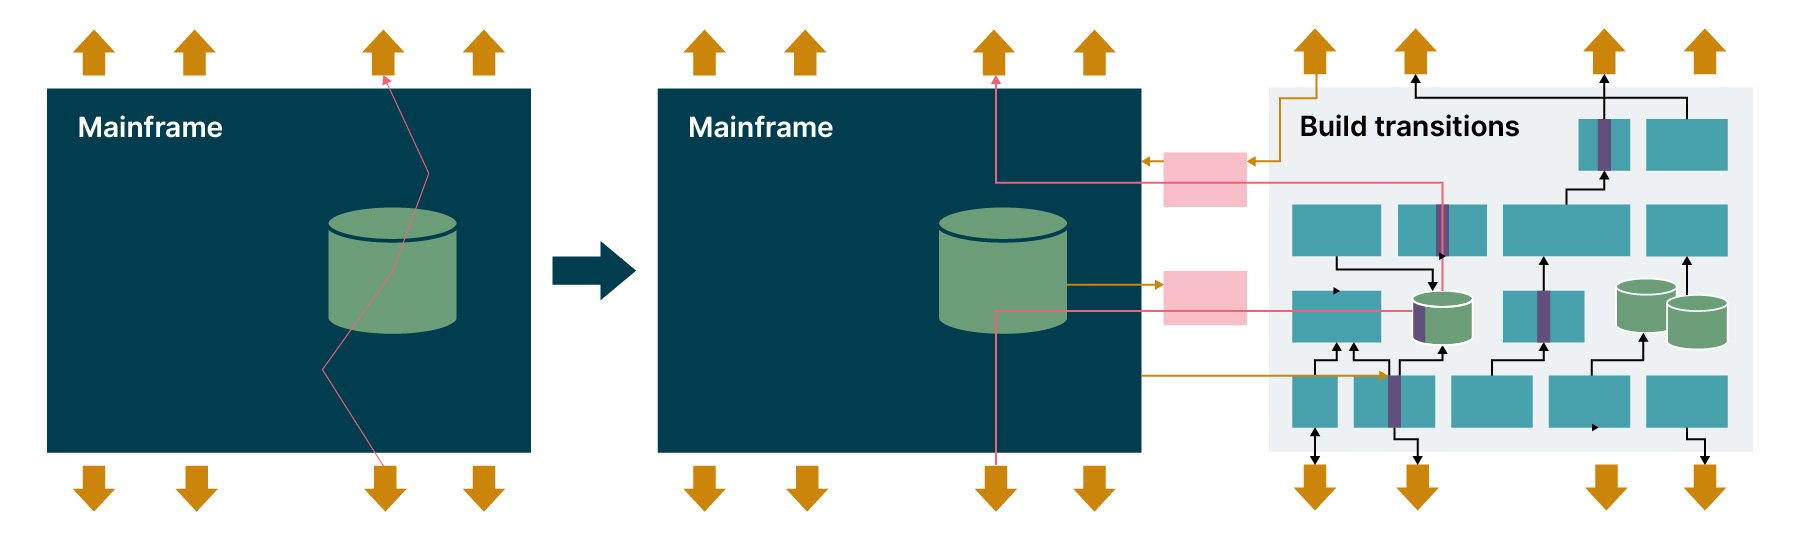 Take a mainframe data flow and re-re-route part of it through new componenets in an incremental transition step, potentially reducing mainframe consumption or improving functionality